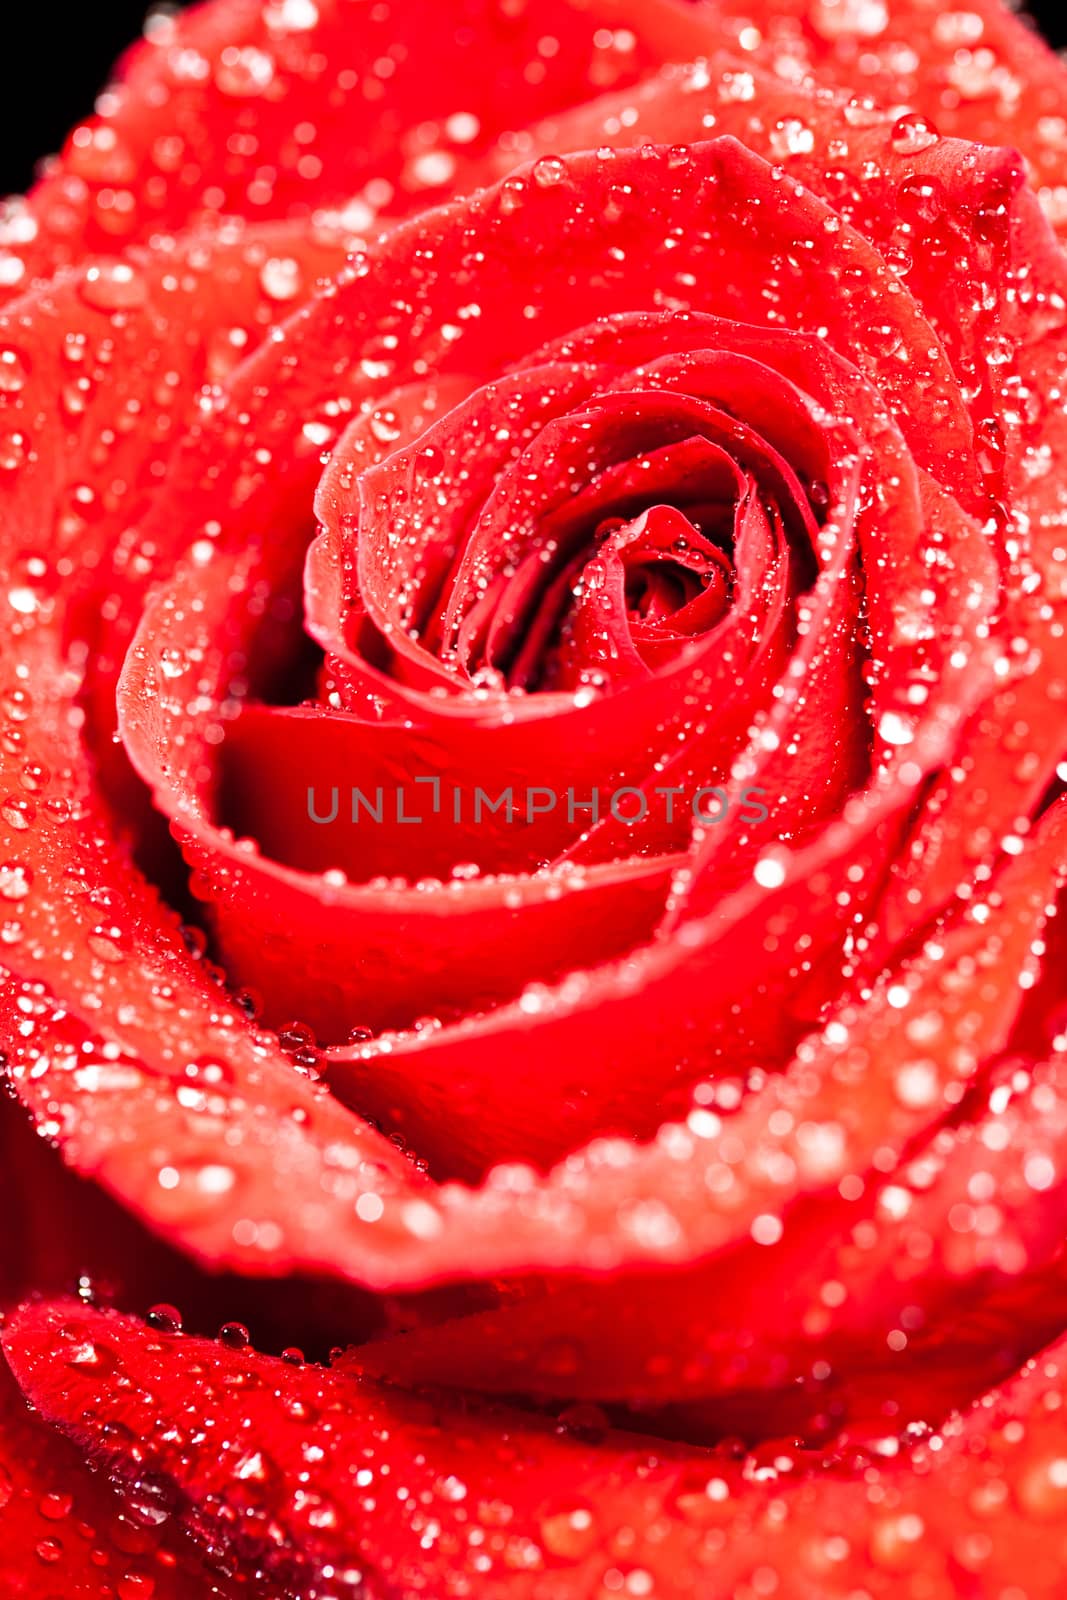 Single beautiful red rose with raindrops over black background by DCStudio